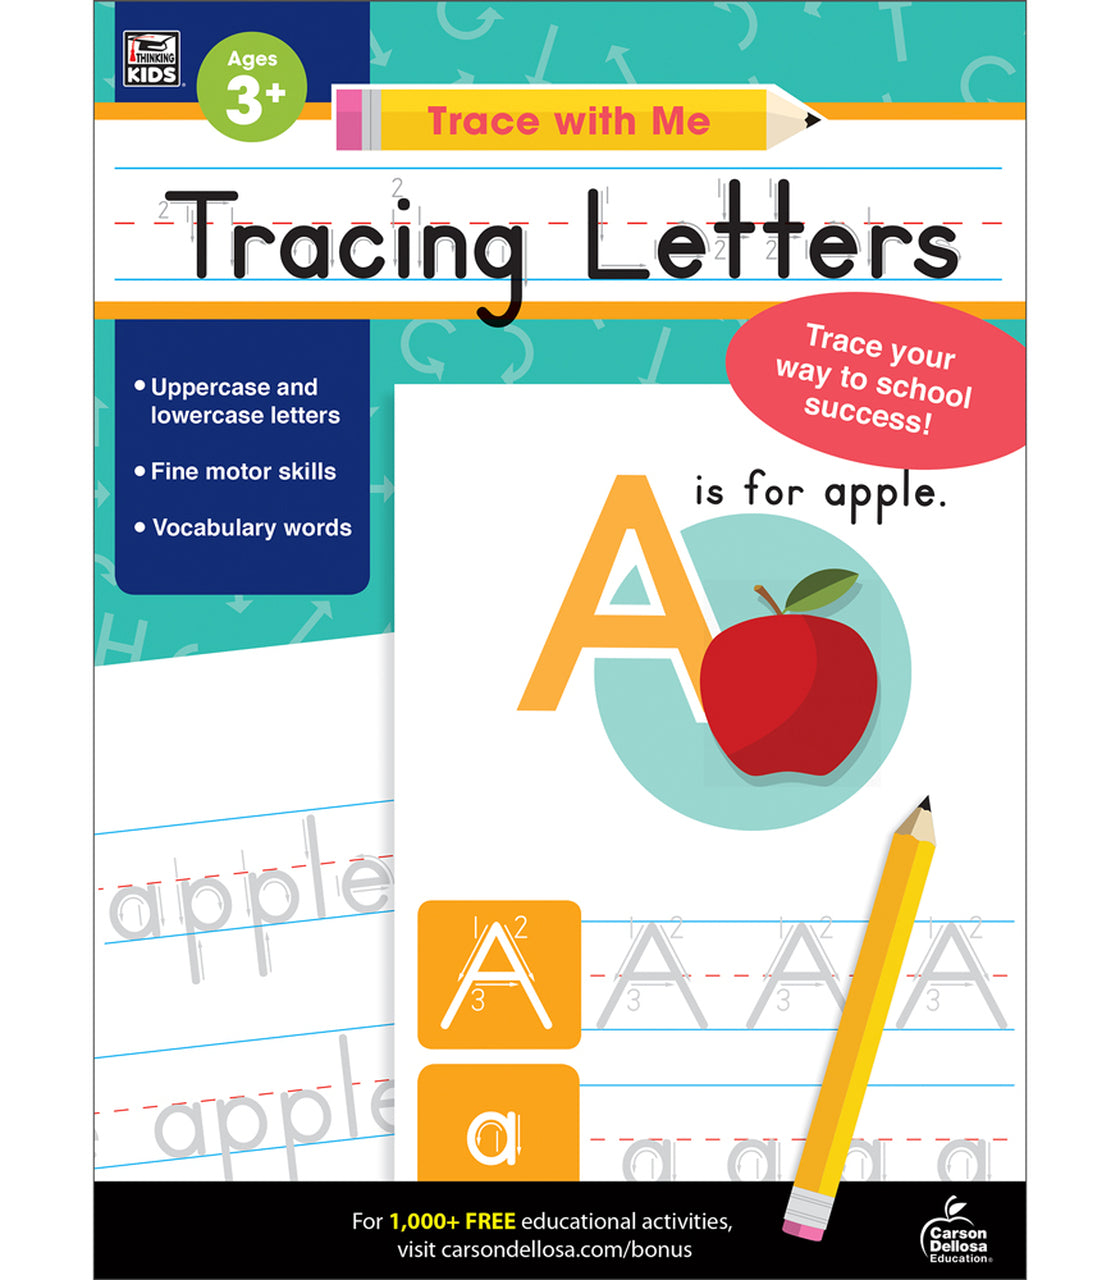 Carson Dellosa Trace with Me: Tracing Letters Activity Book Grade Toddler-K (CD 705215)